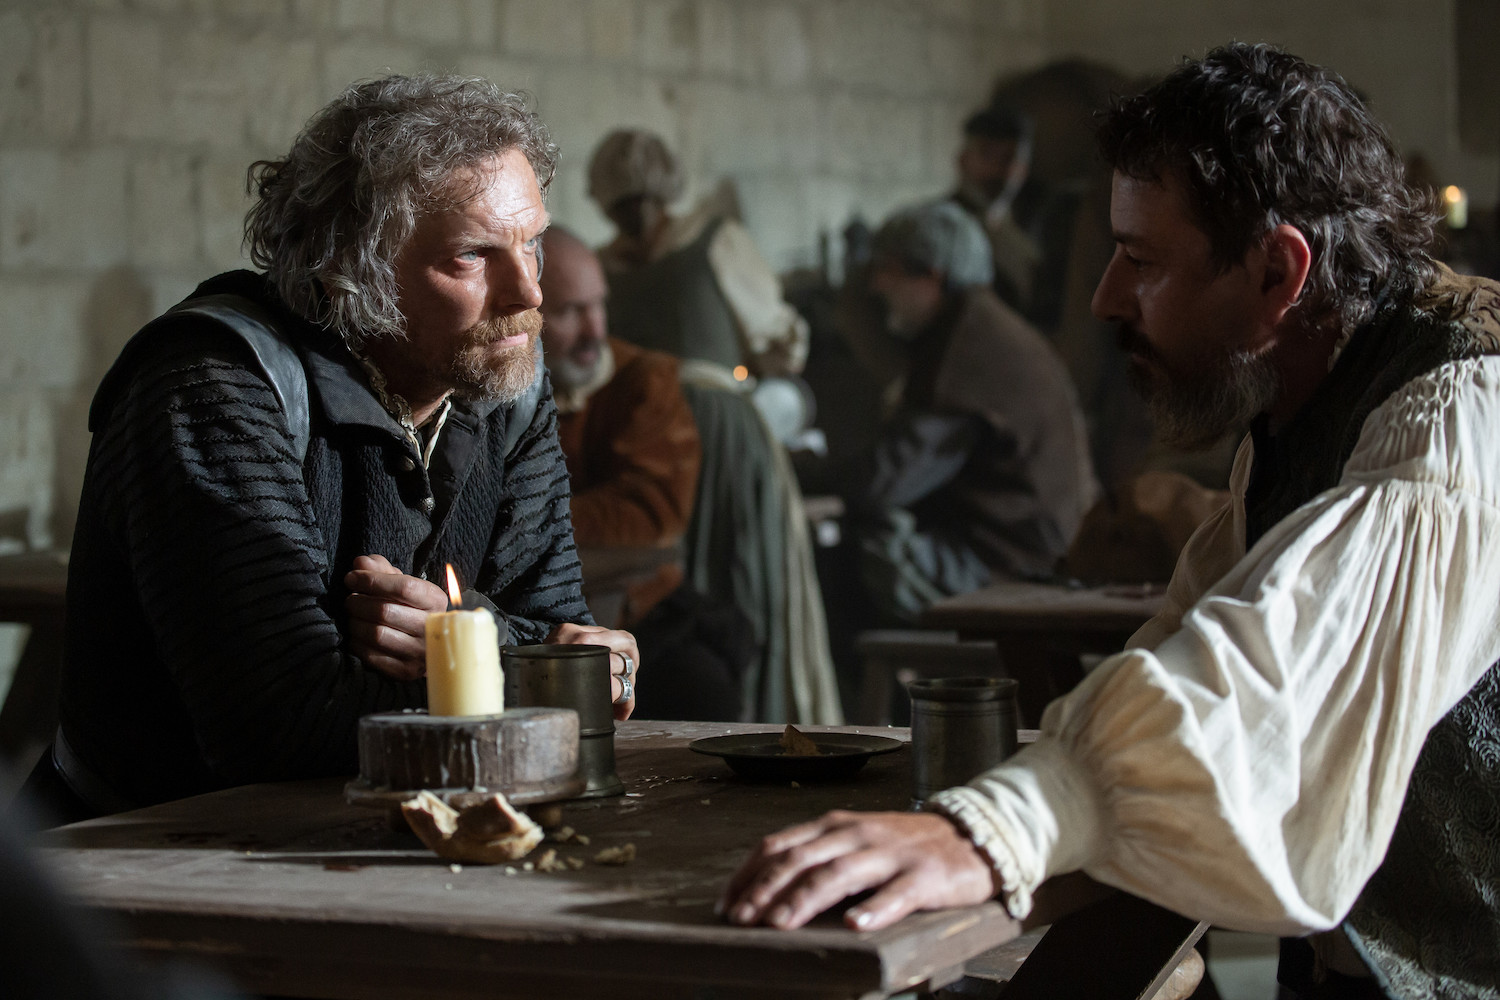 Picture shows: Montmorency (Barry Atsma) and Ruggiero (Enzo Cilenti) sit at a table in a tavern.